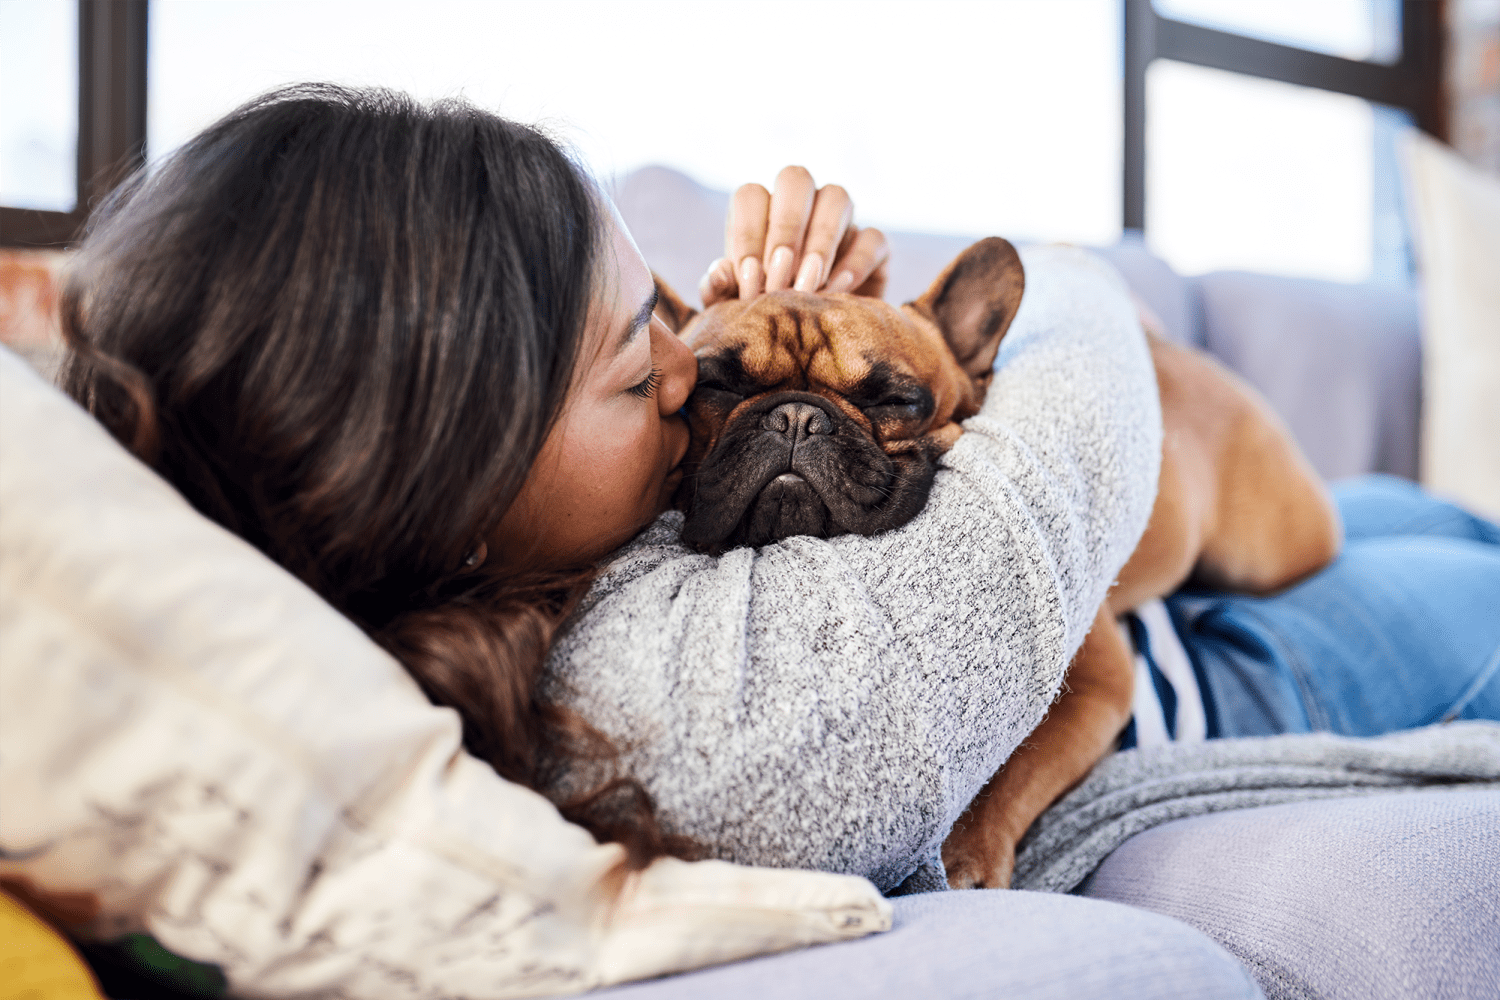 Resident snuggling with her French bulldog at Tanglewood Terrace Apartment Homes in Piscataway, New Jersey